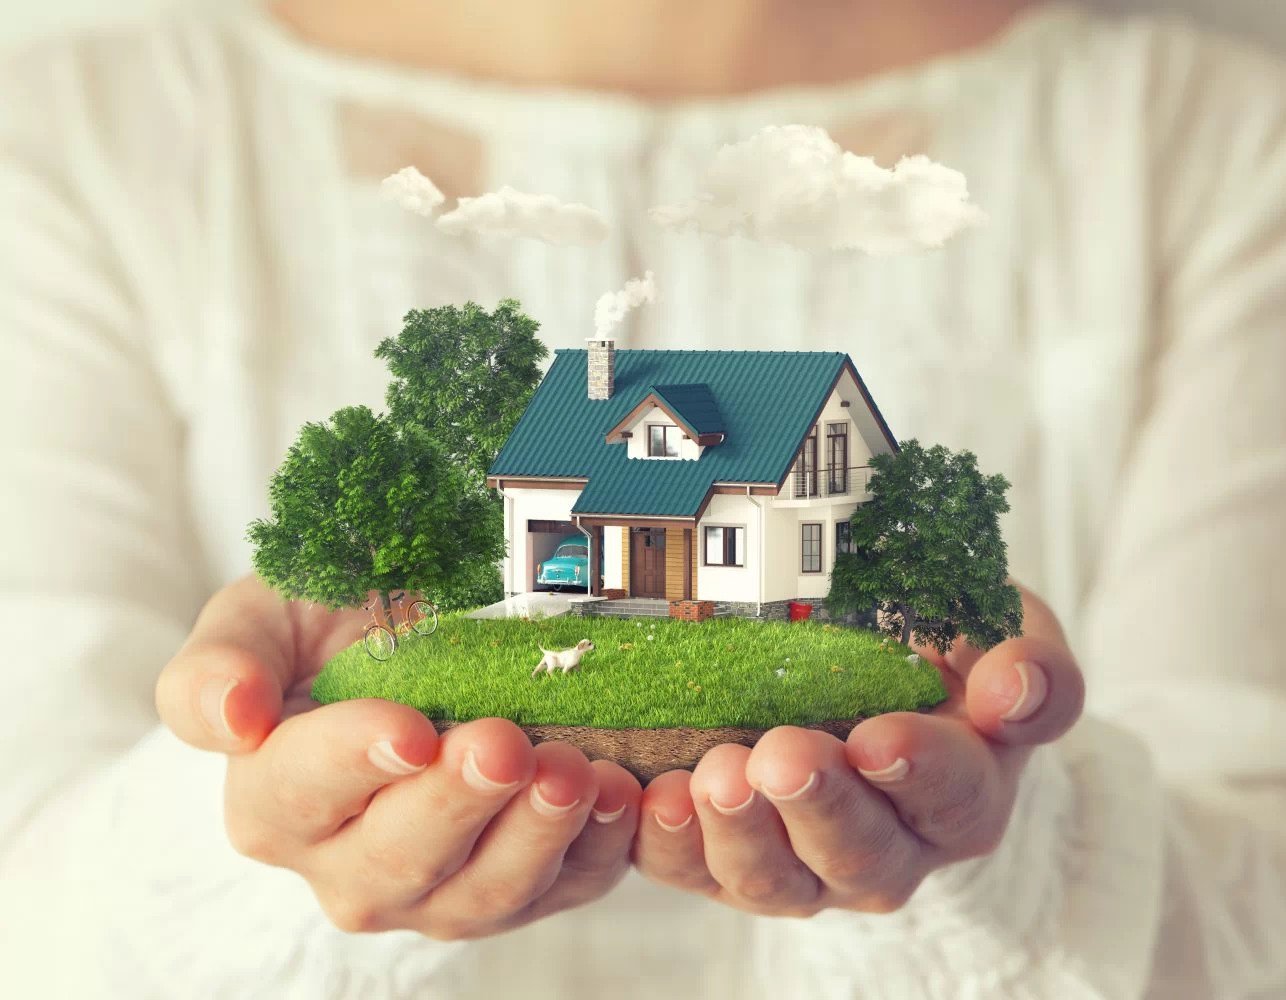 House And Land Packages: The Smartest Way To Buy A Home